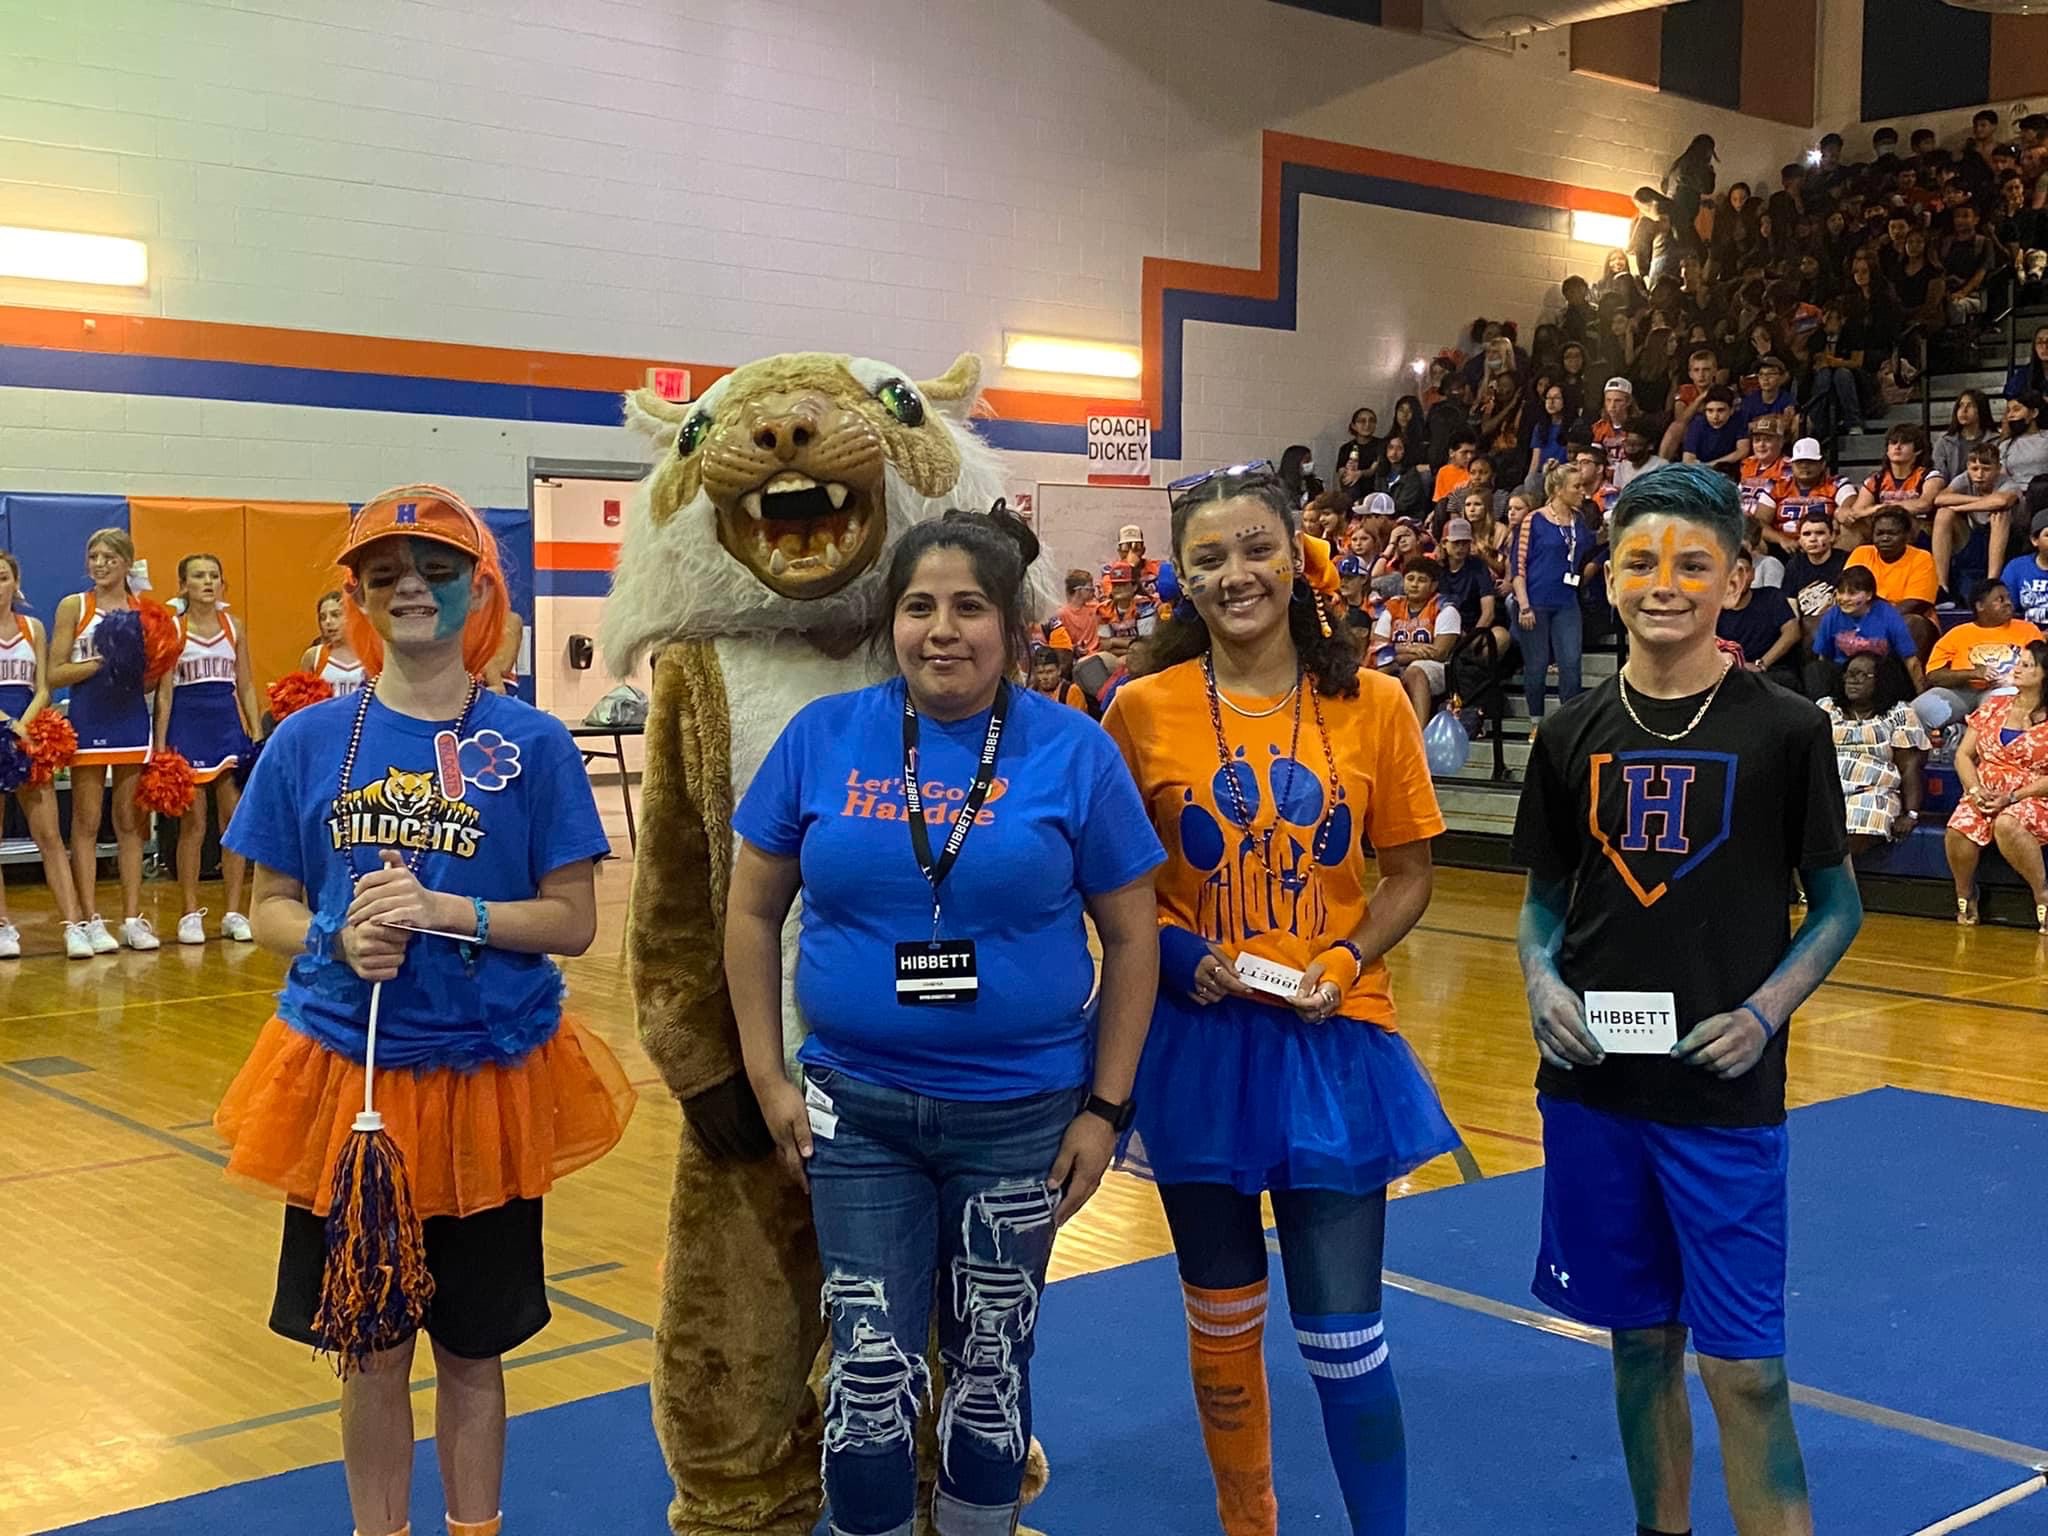 Extreme Orange and Blue Student Winners